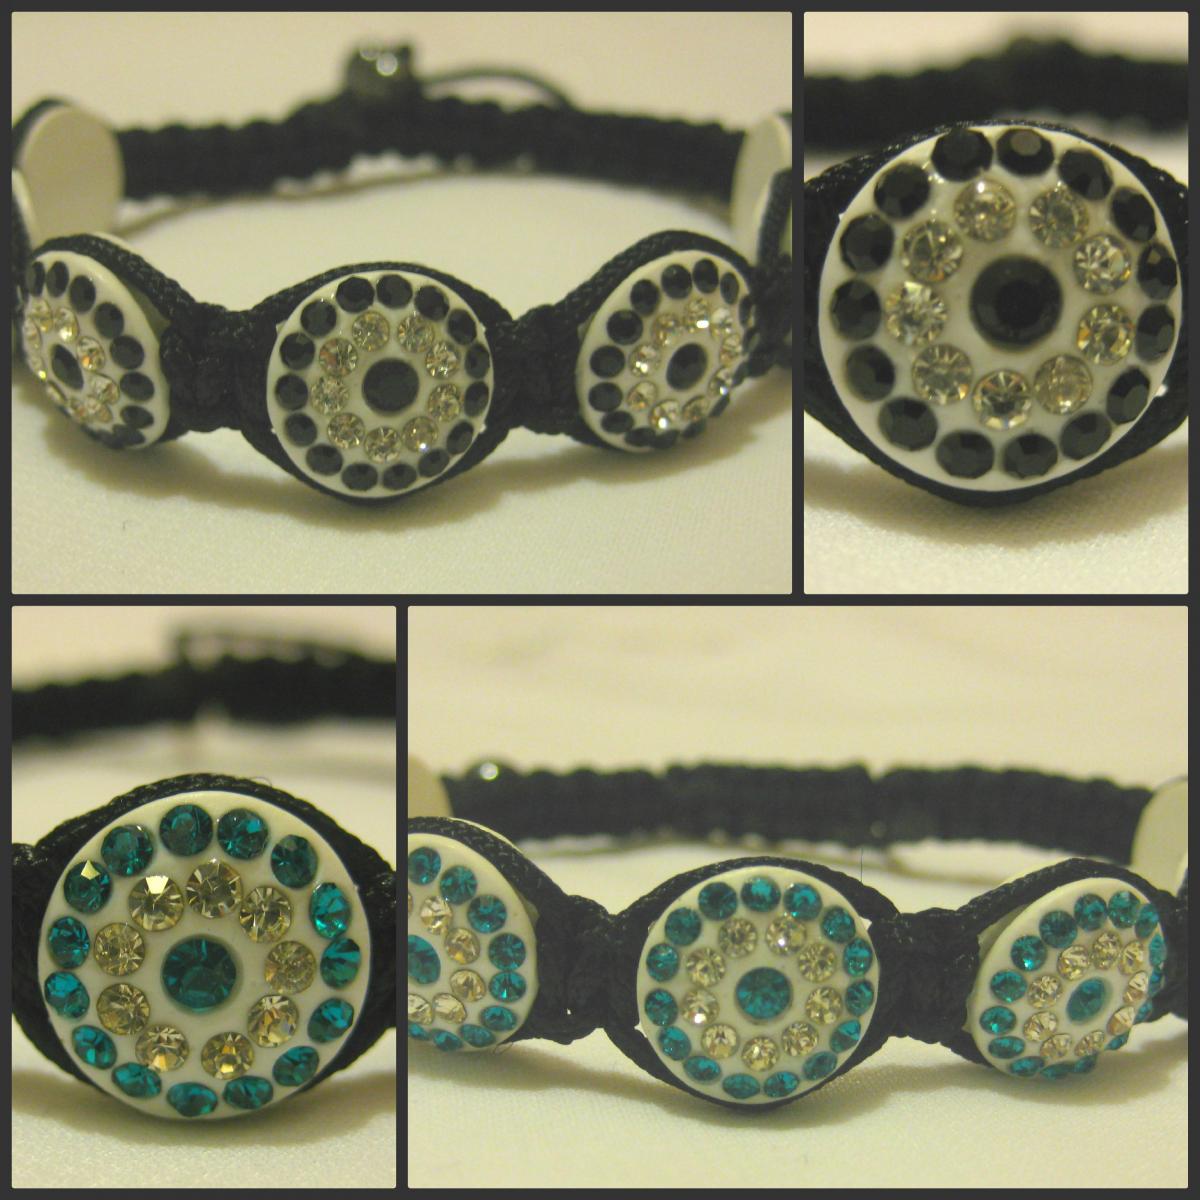 Black Or Turquoise And White Crystal Coin Shaped Pave Bead Macrame Friendship Bracelet